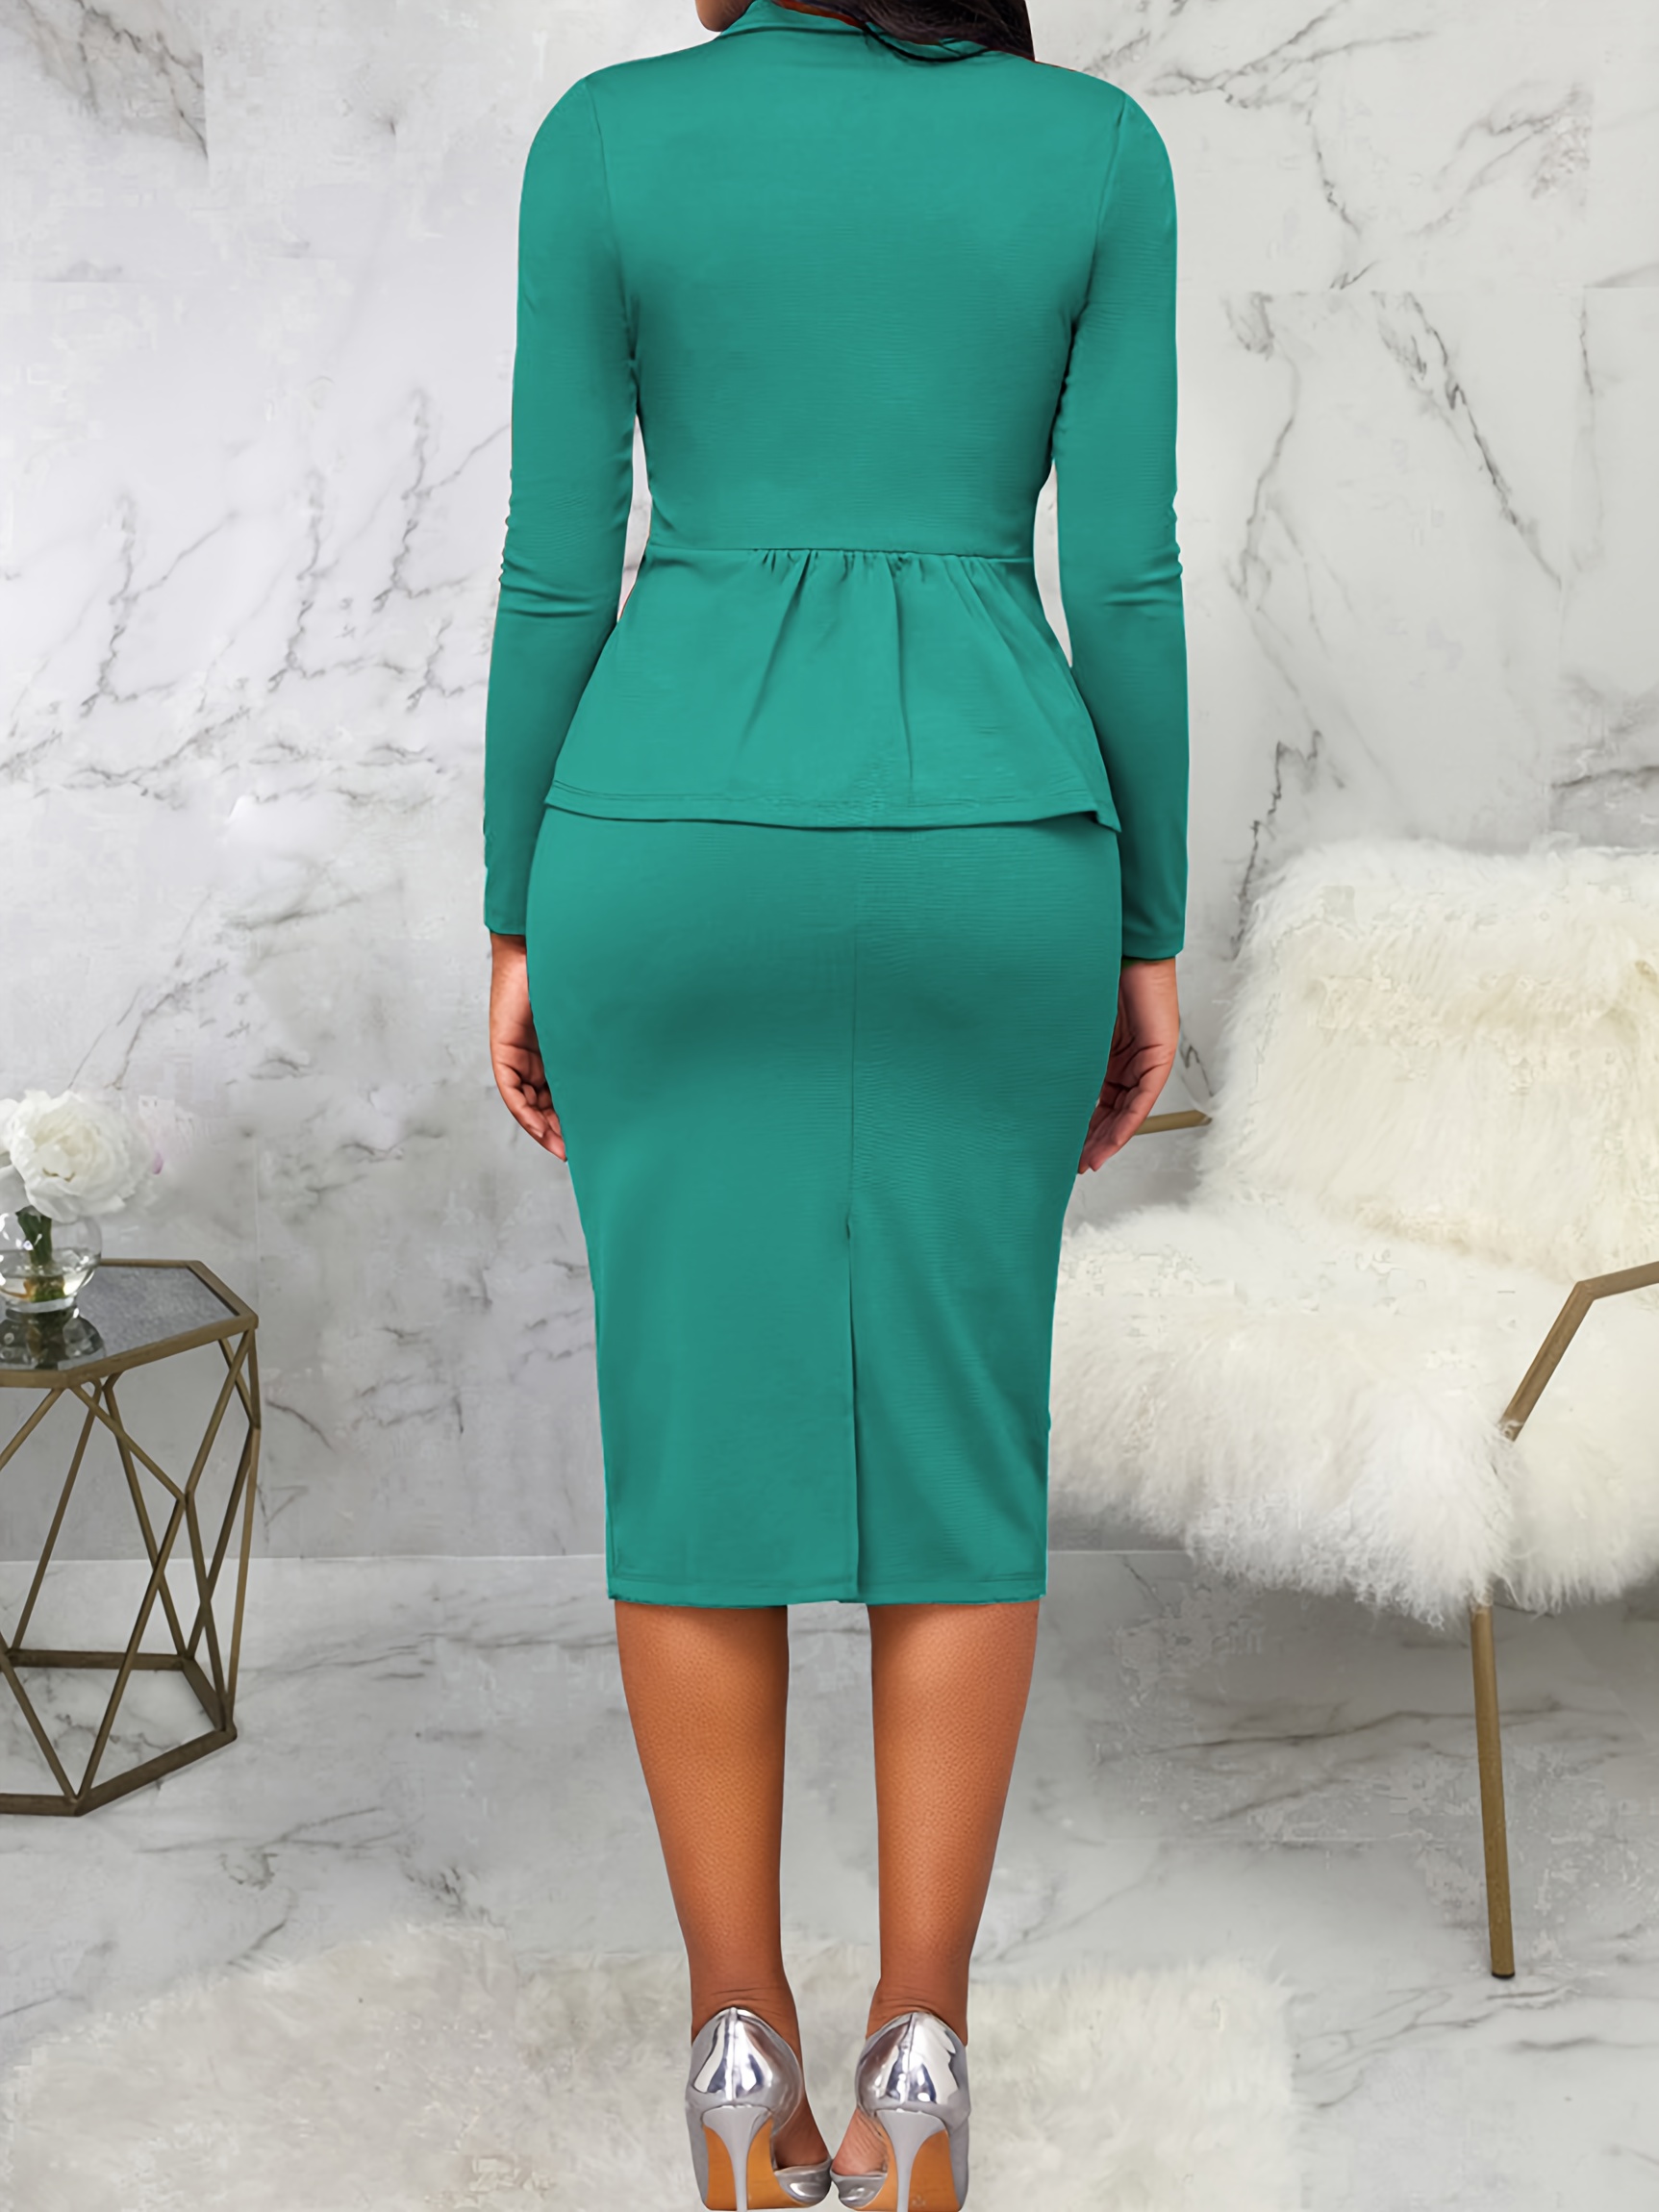 Professional Two-piece Suit Set, Lapel Collar Top & Bodycon Skirt Outfits,  Women's Clothing